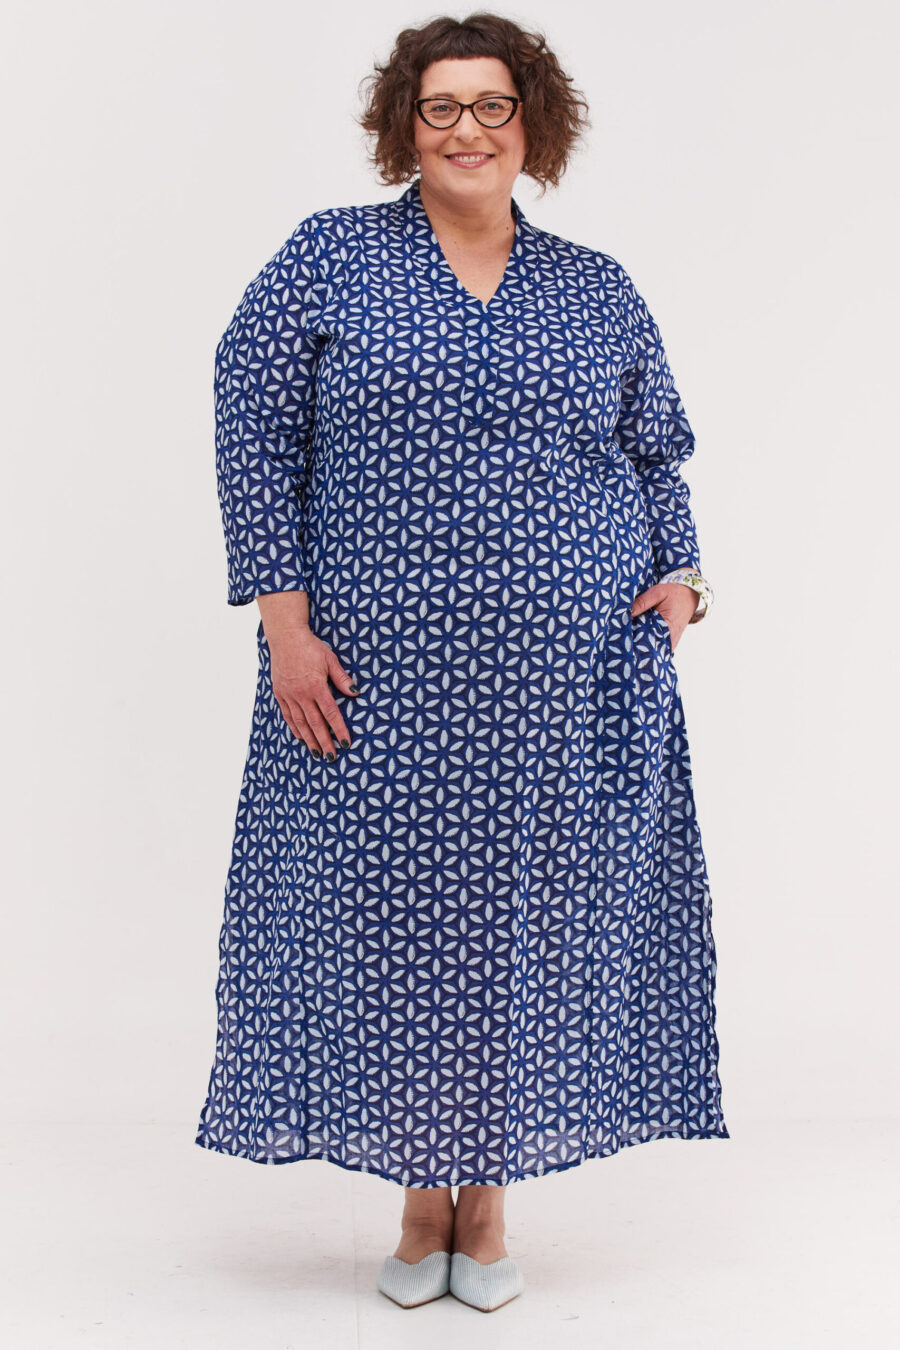 Jalabiya dress | Uniquely designed dress - Flower of life, blue dress with flower of life print in Light blue and black shades by comfort zone boutique